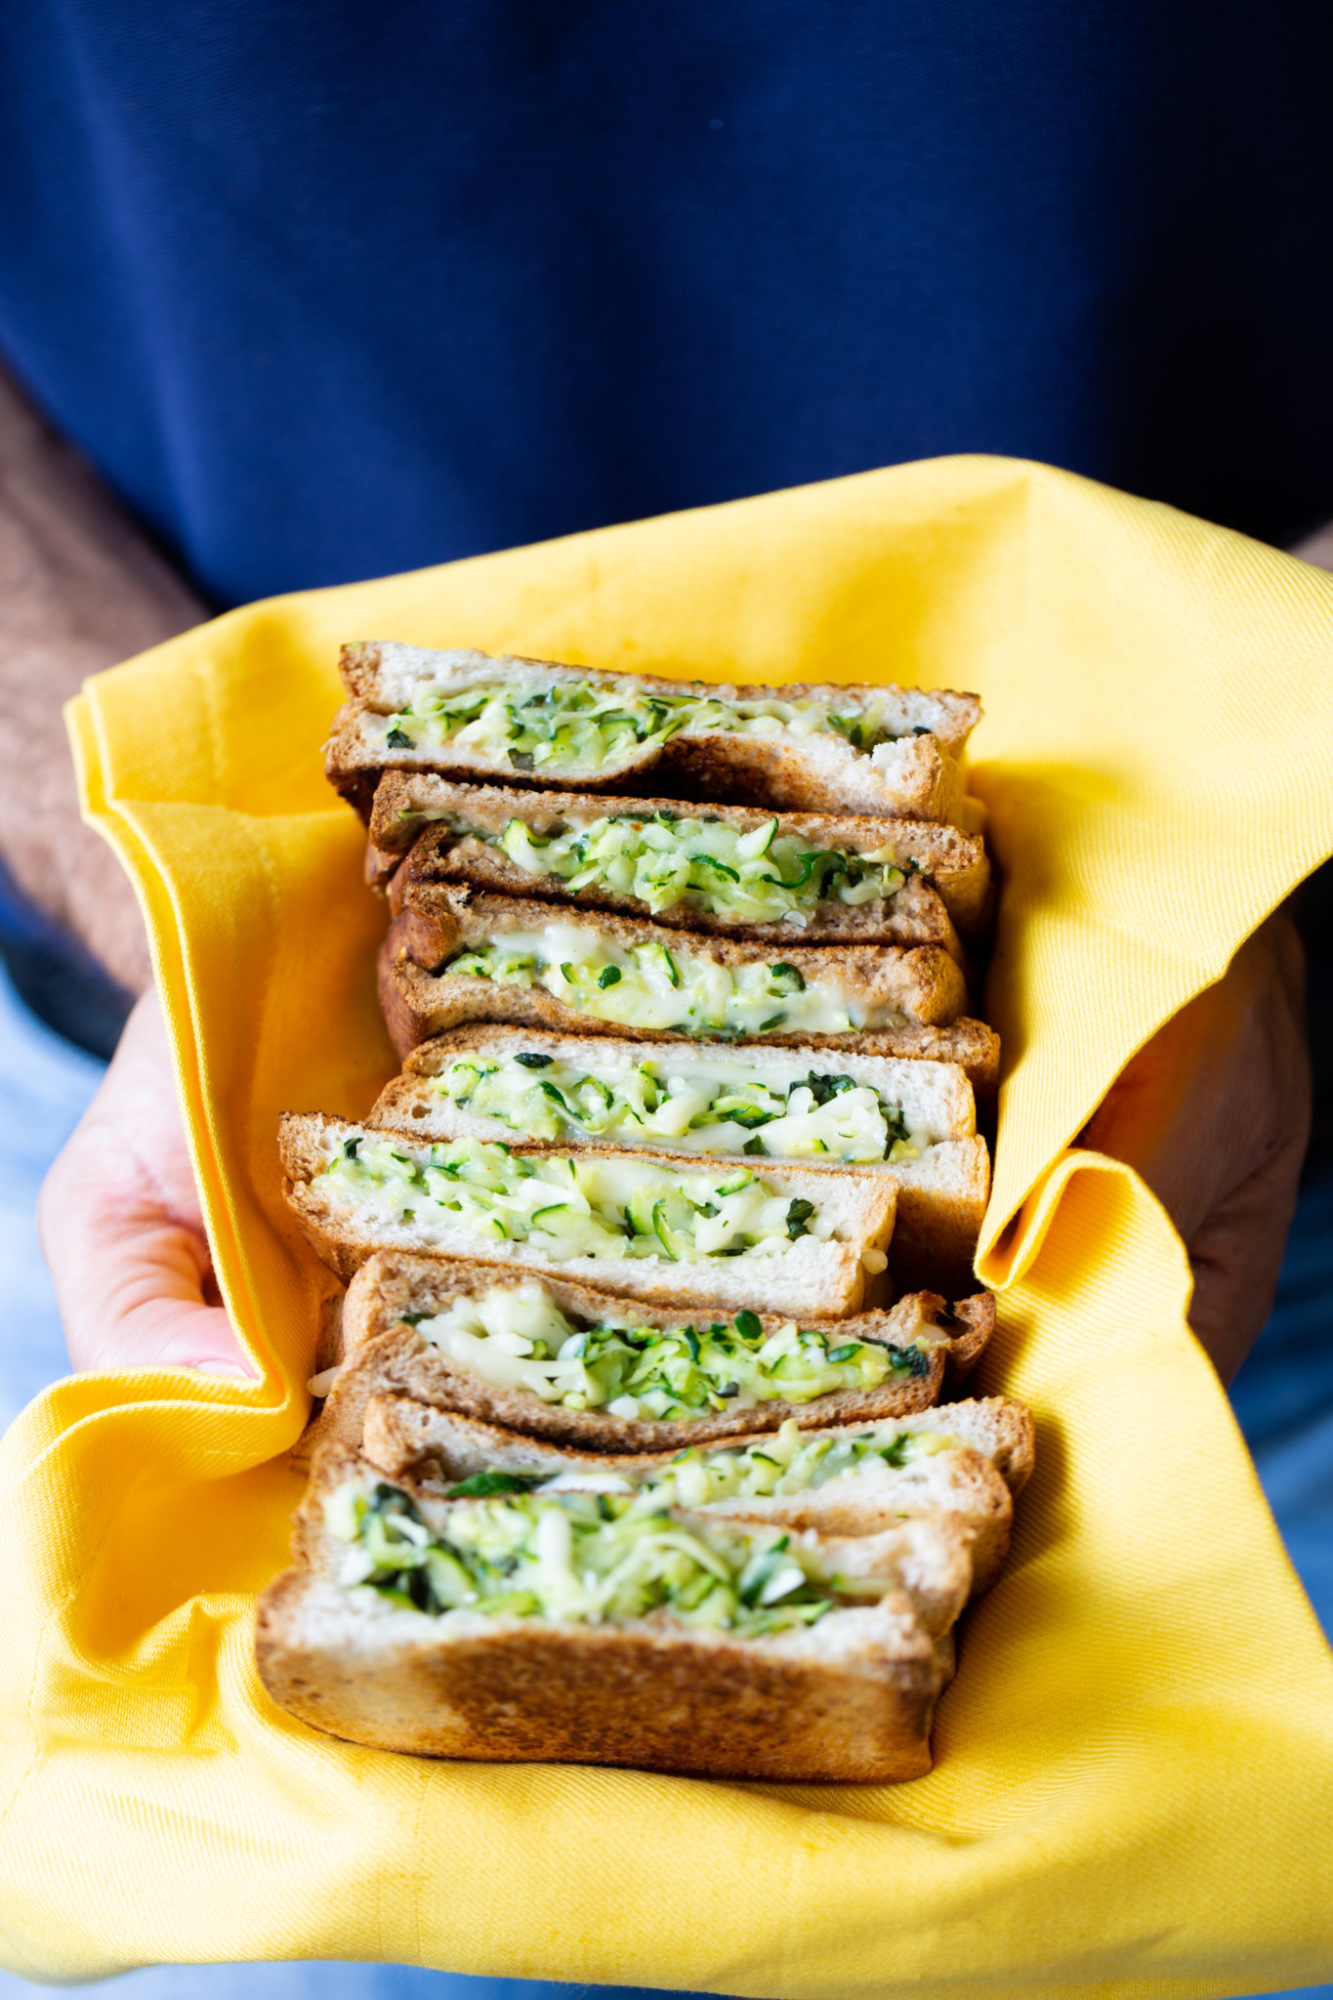 Zucchini sandwich on a yellow cloth napkin being held by a man.